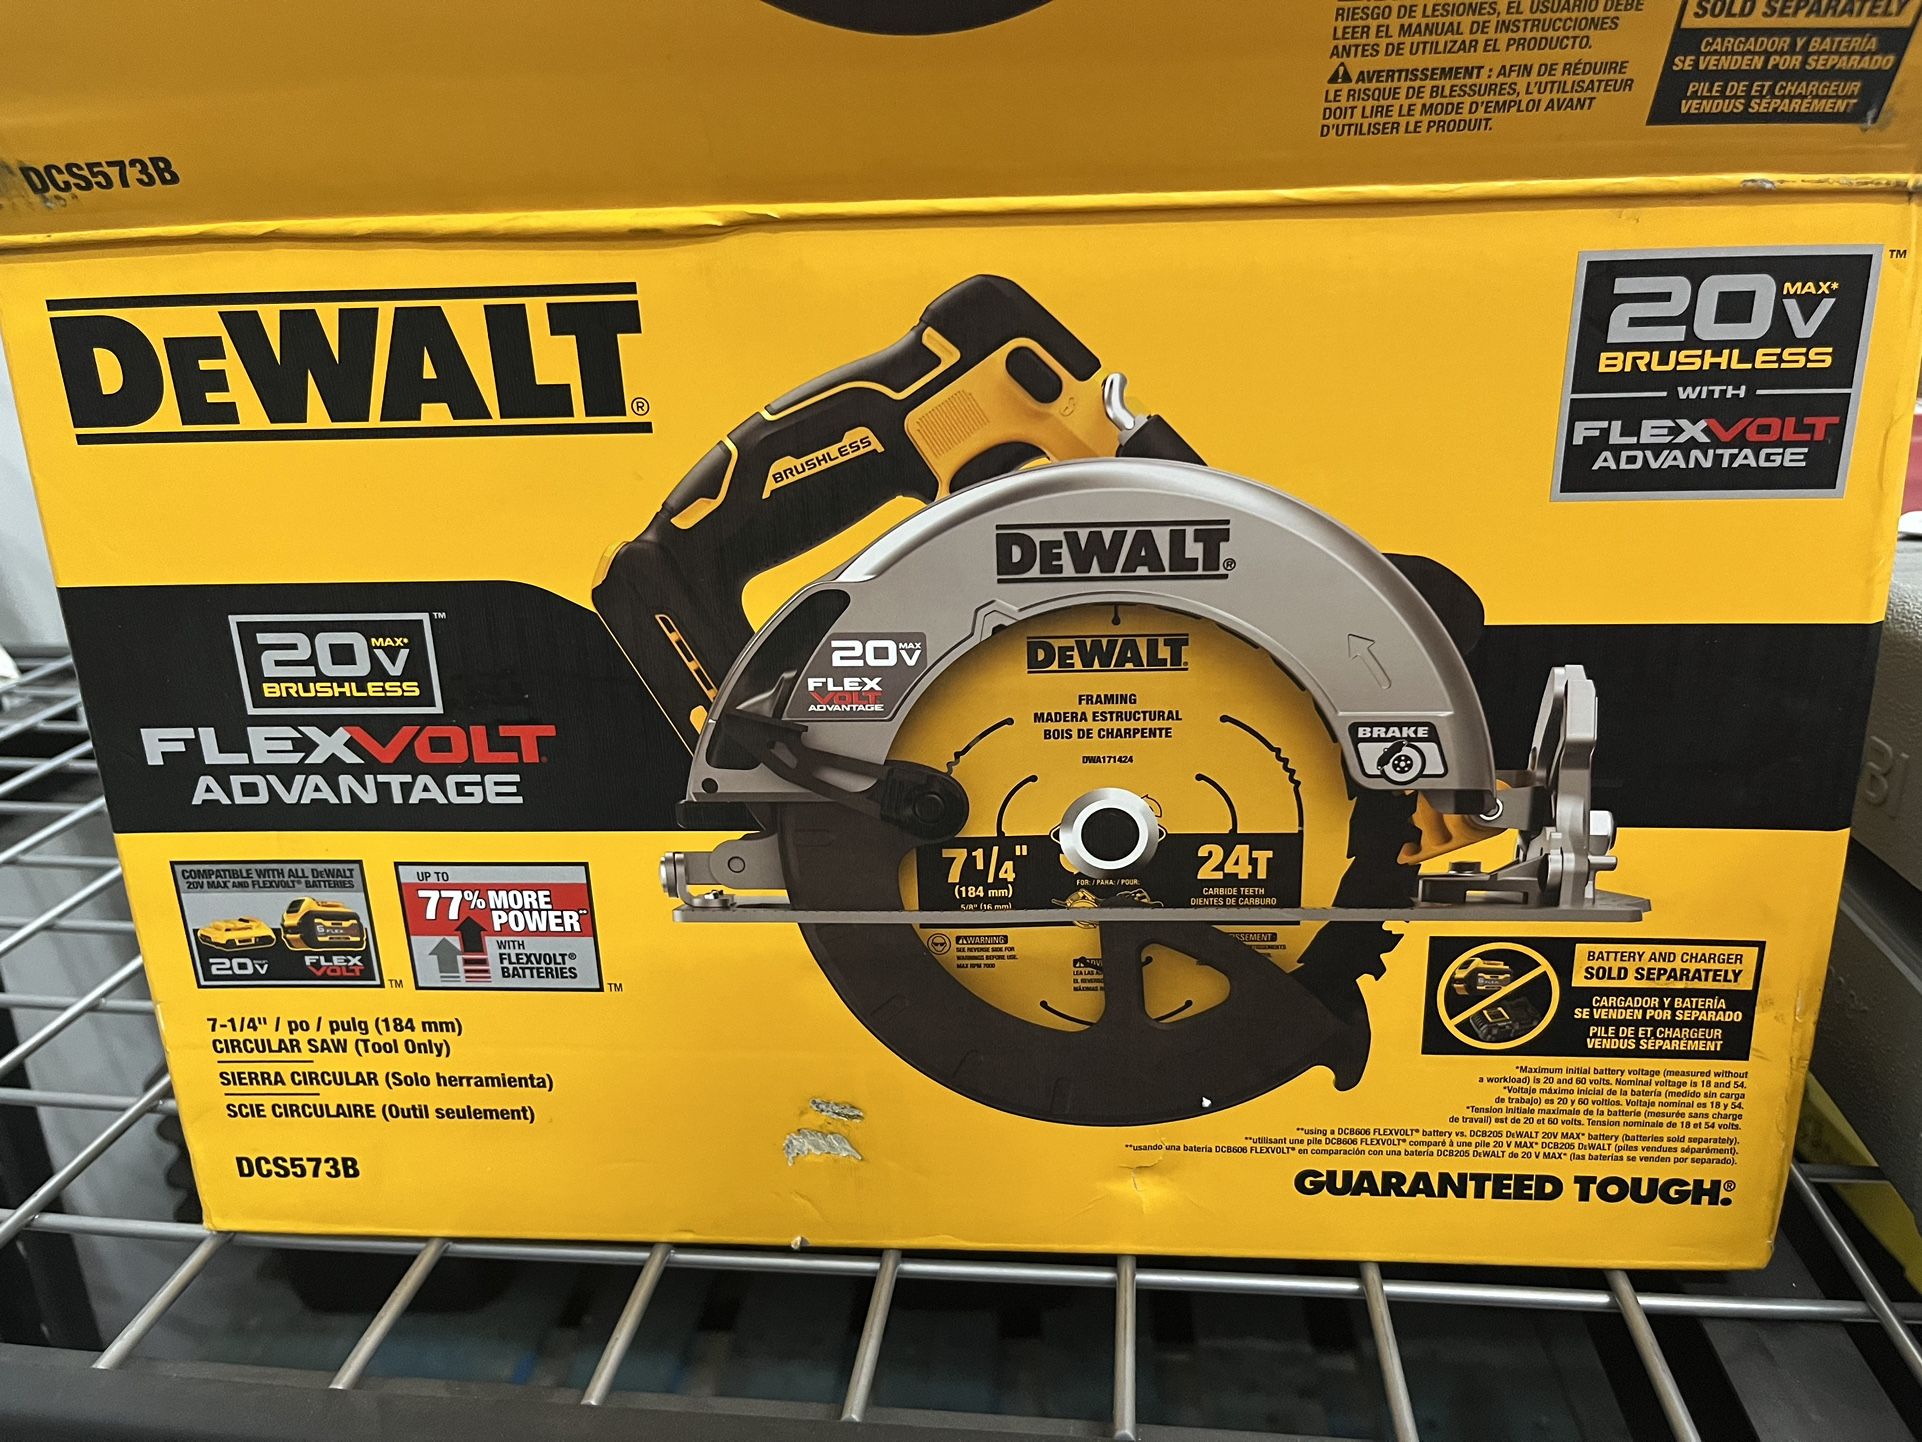 NEW DEWALT 20V MAX* 7-1/4 in. Brushless Cordless Circular Saw with FLEXVOLT ADVANTAGE™ (Tool Only)